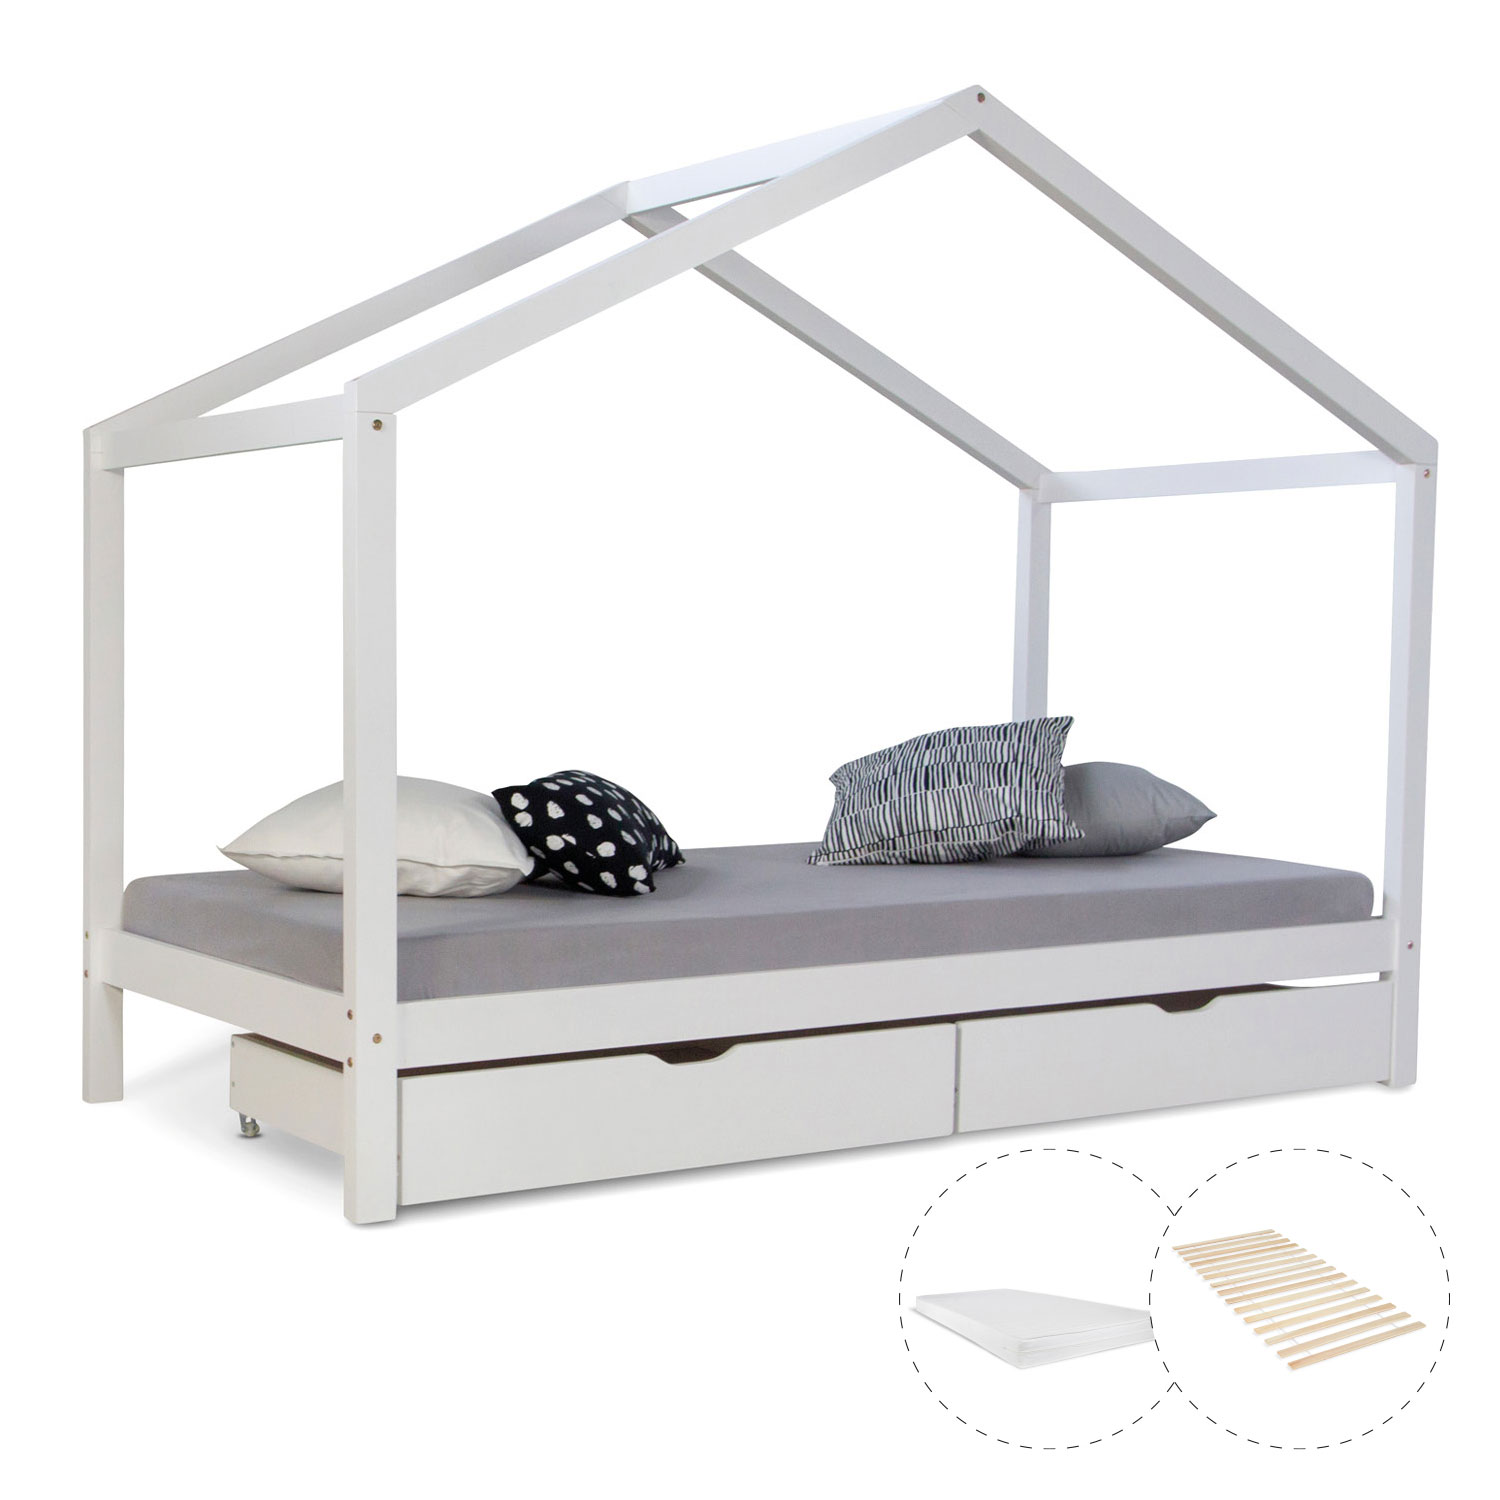 Cot House Bed 90x200 cm + Mattress Children's House Play Bed Wooden Bed Bed Drawer 